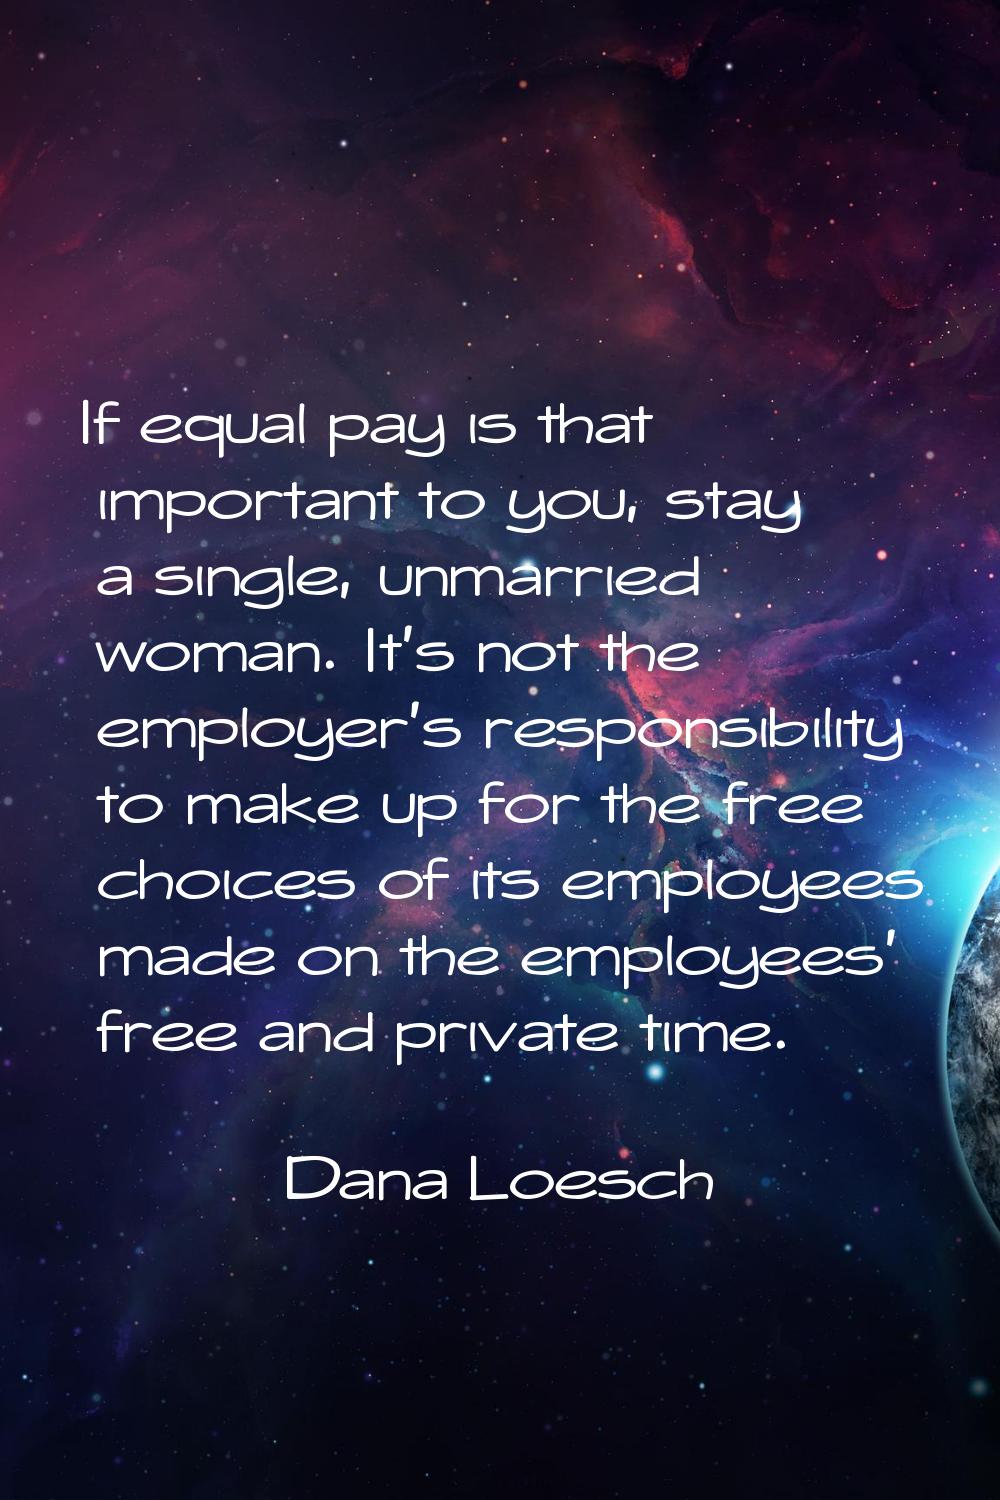 If equal pay is that important to you, stay a single, unmarried woman. It's not the employer's resp